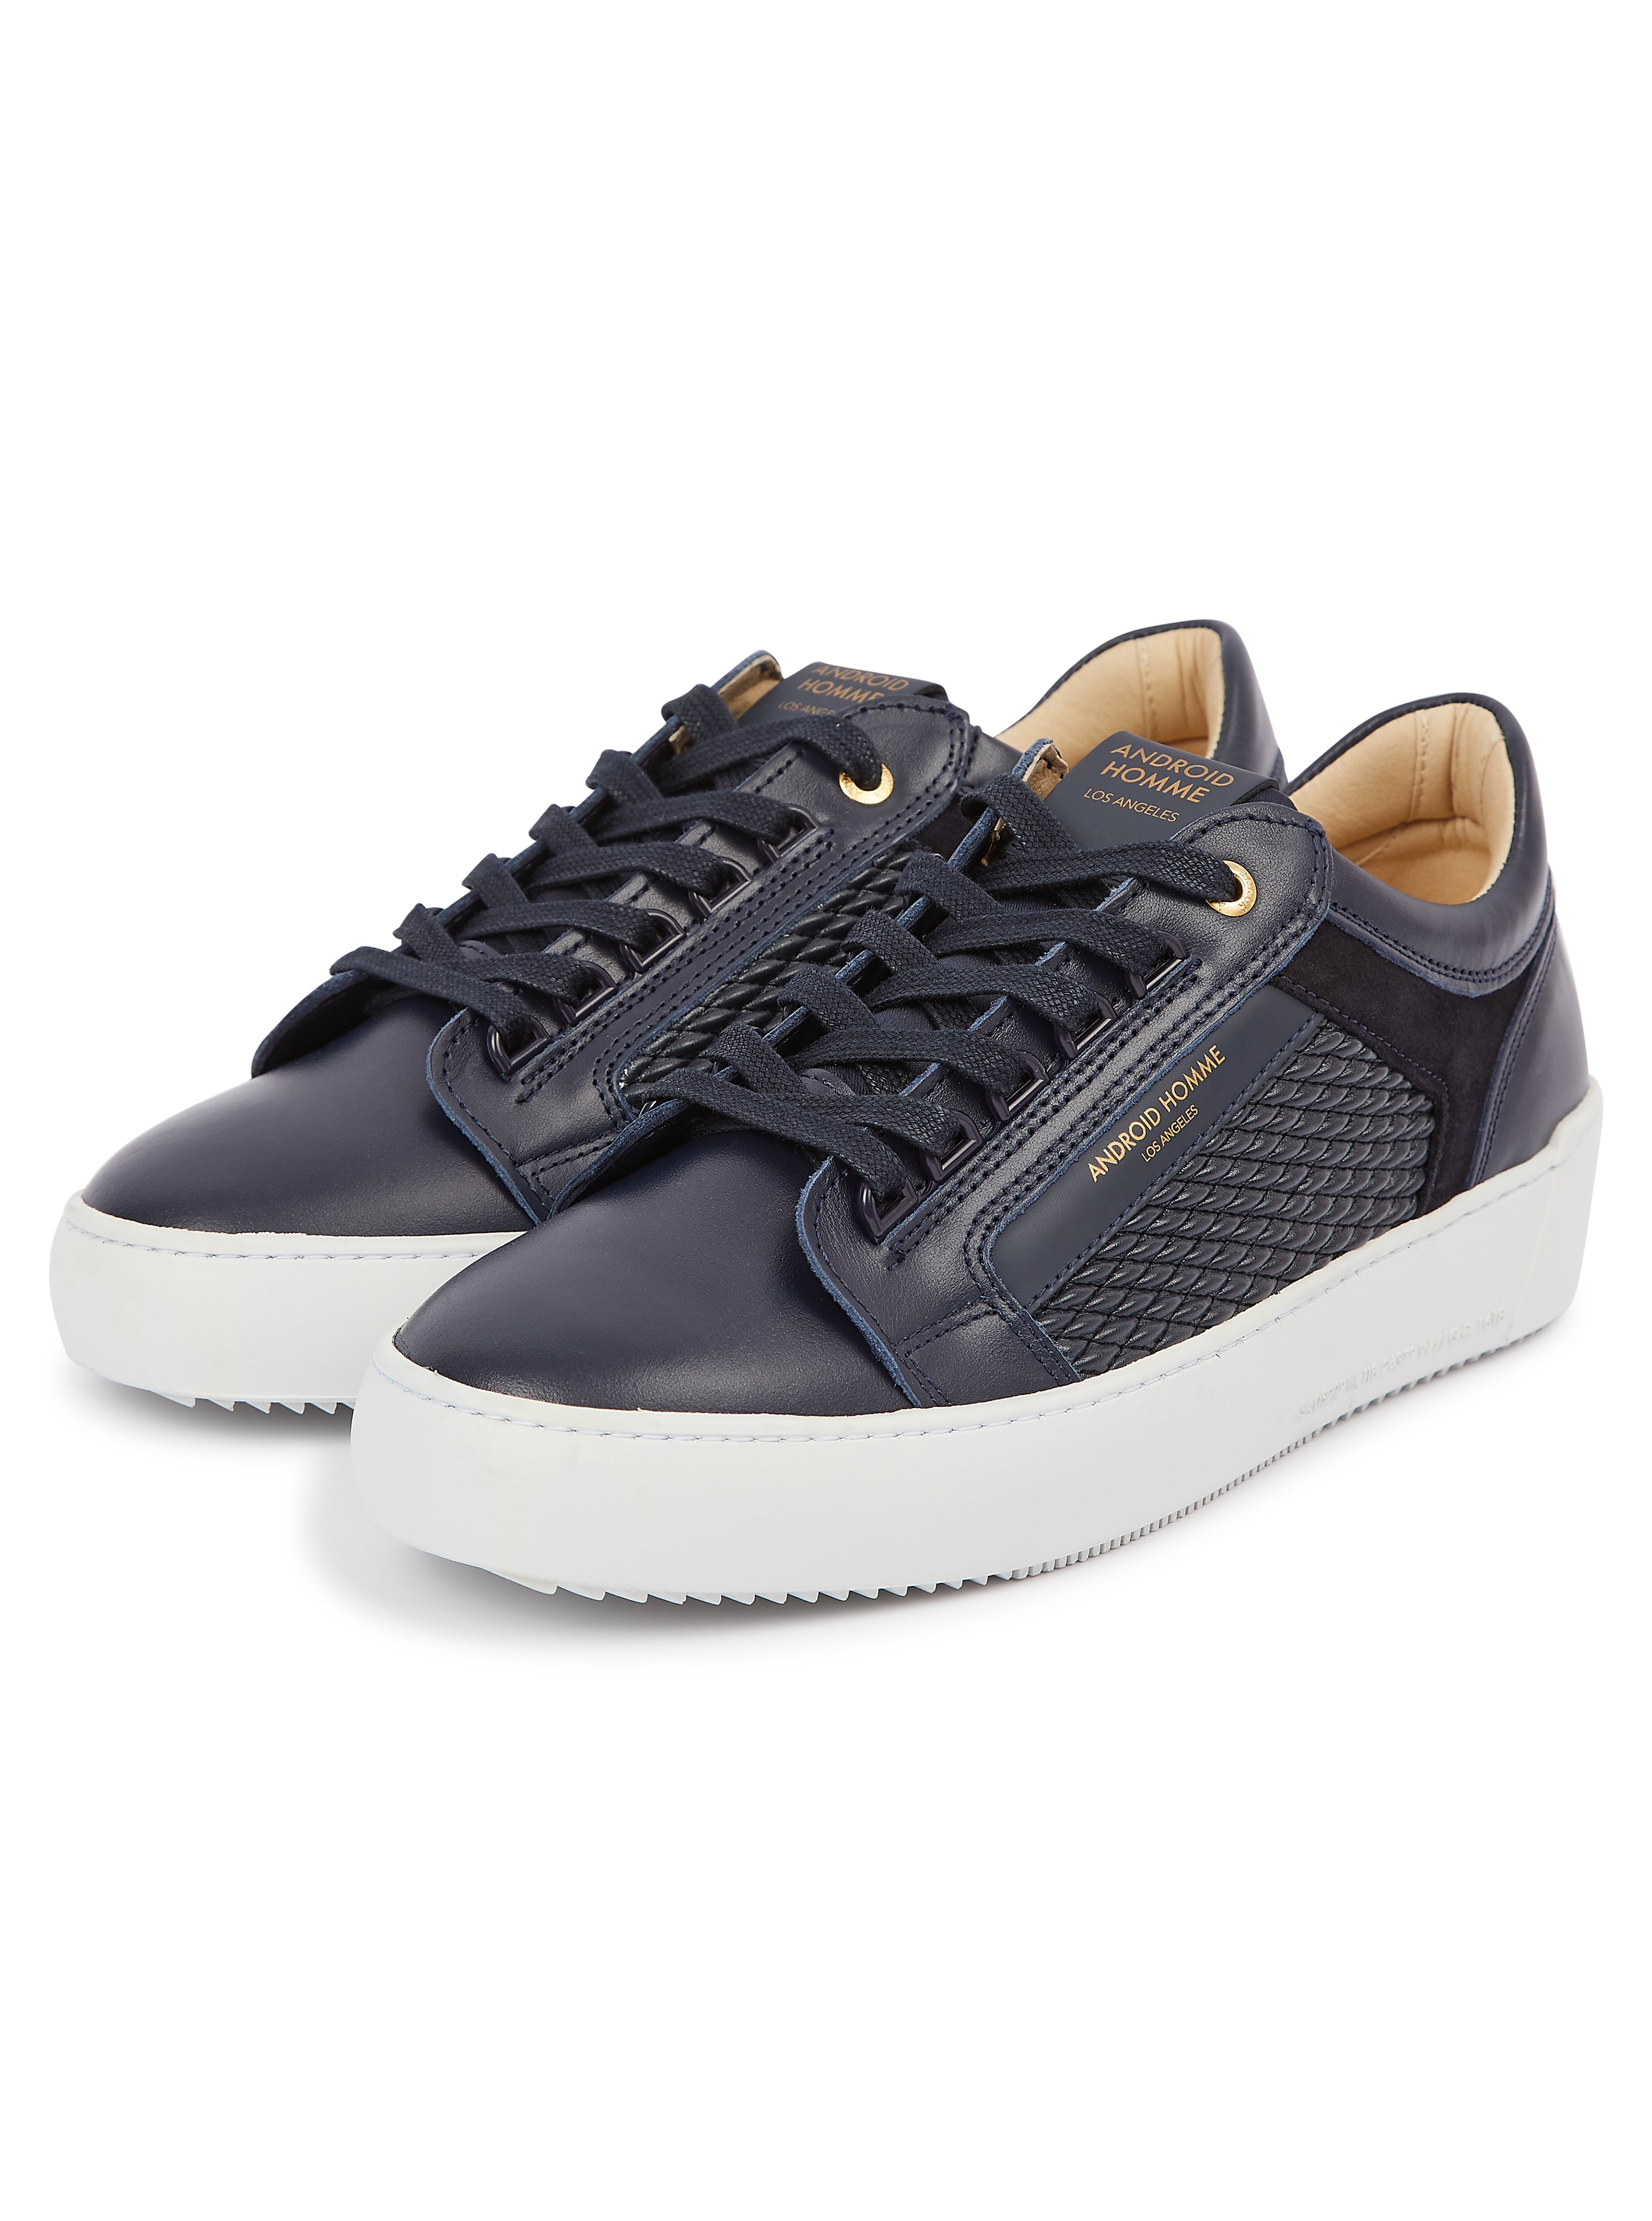 Load image into Gallery viewer, Android Homme Venice Stretch Woven Navy
